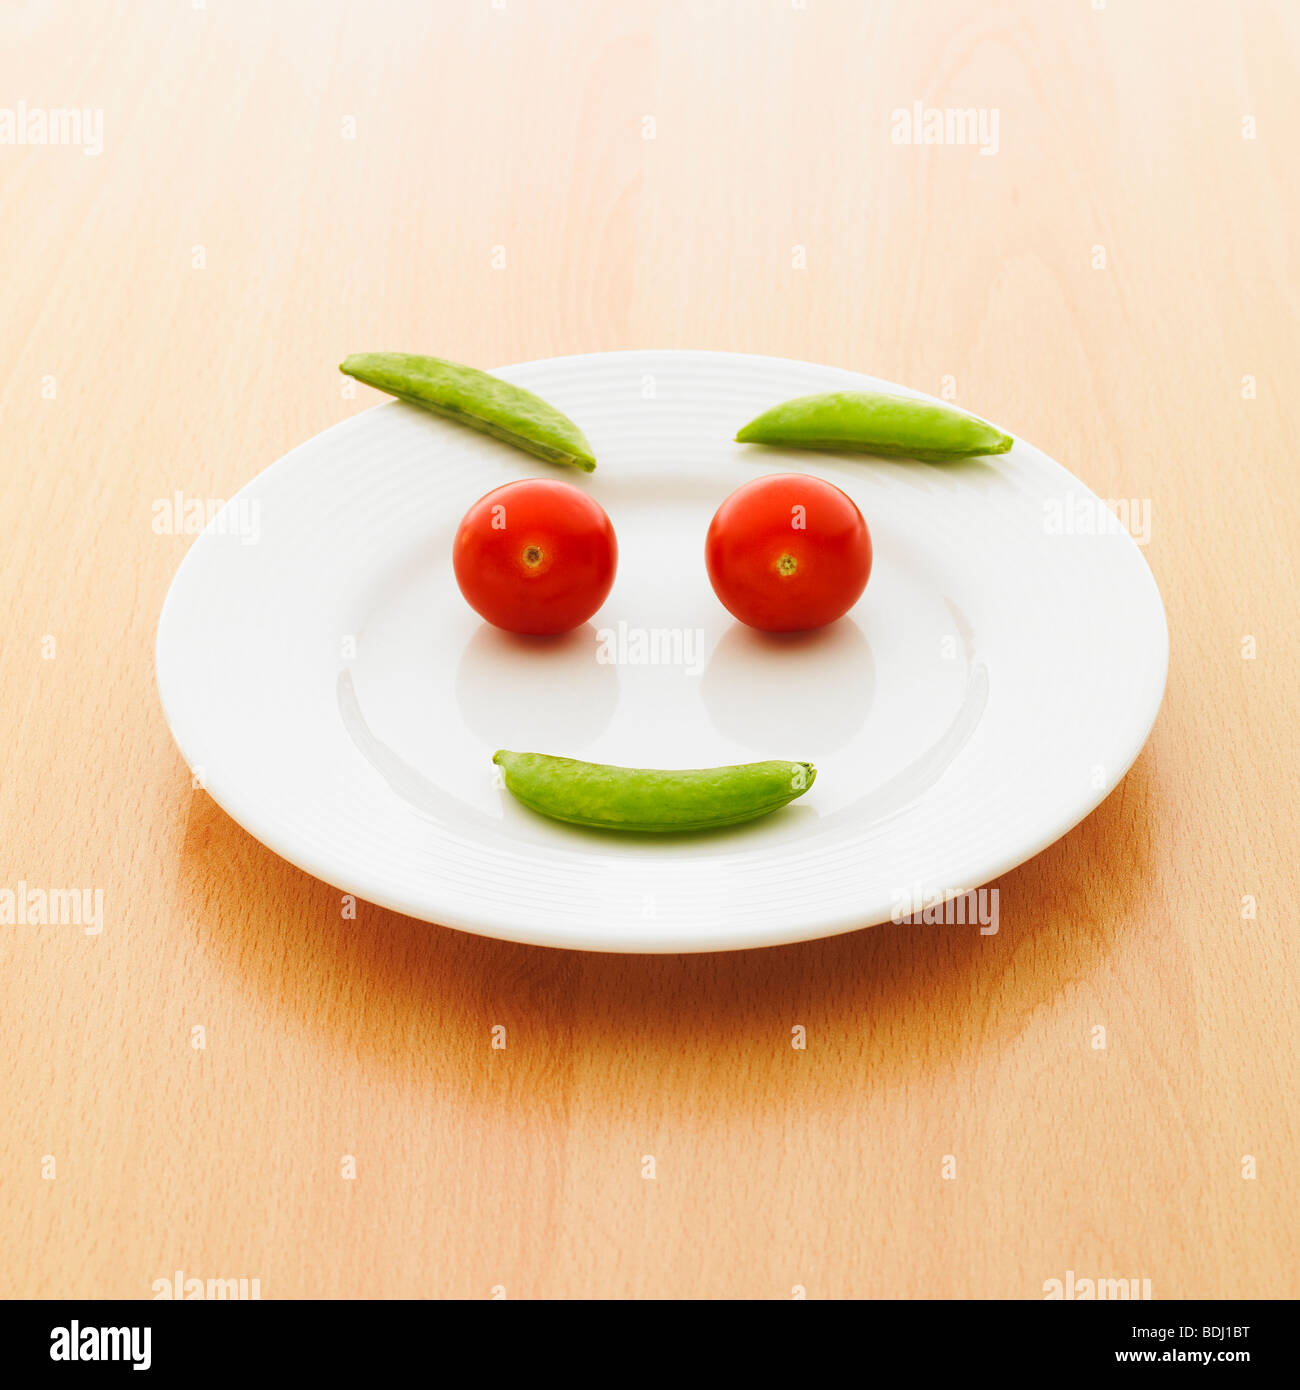 A plate of cherry tomatoes and sugar snap peas making a smiley face. Stock Photo